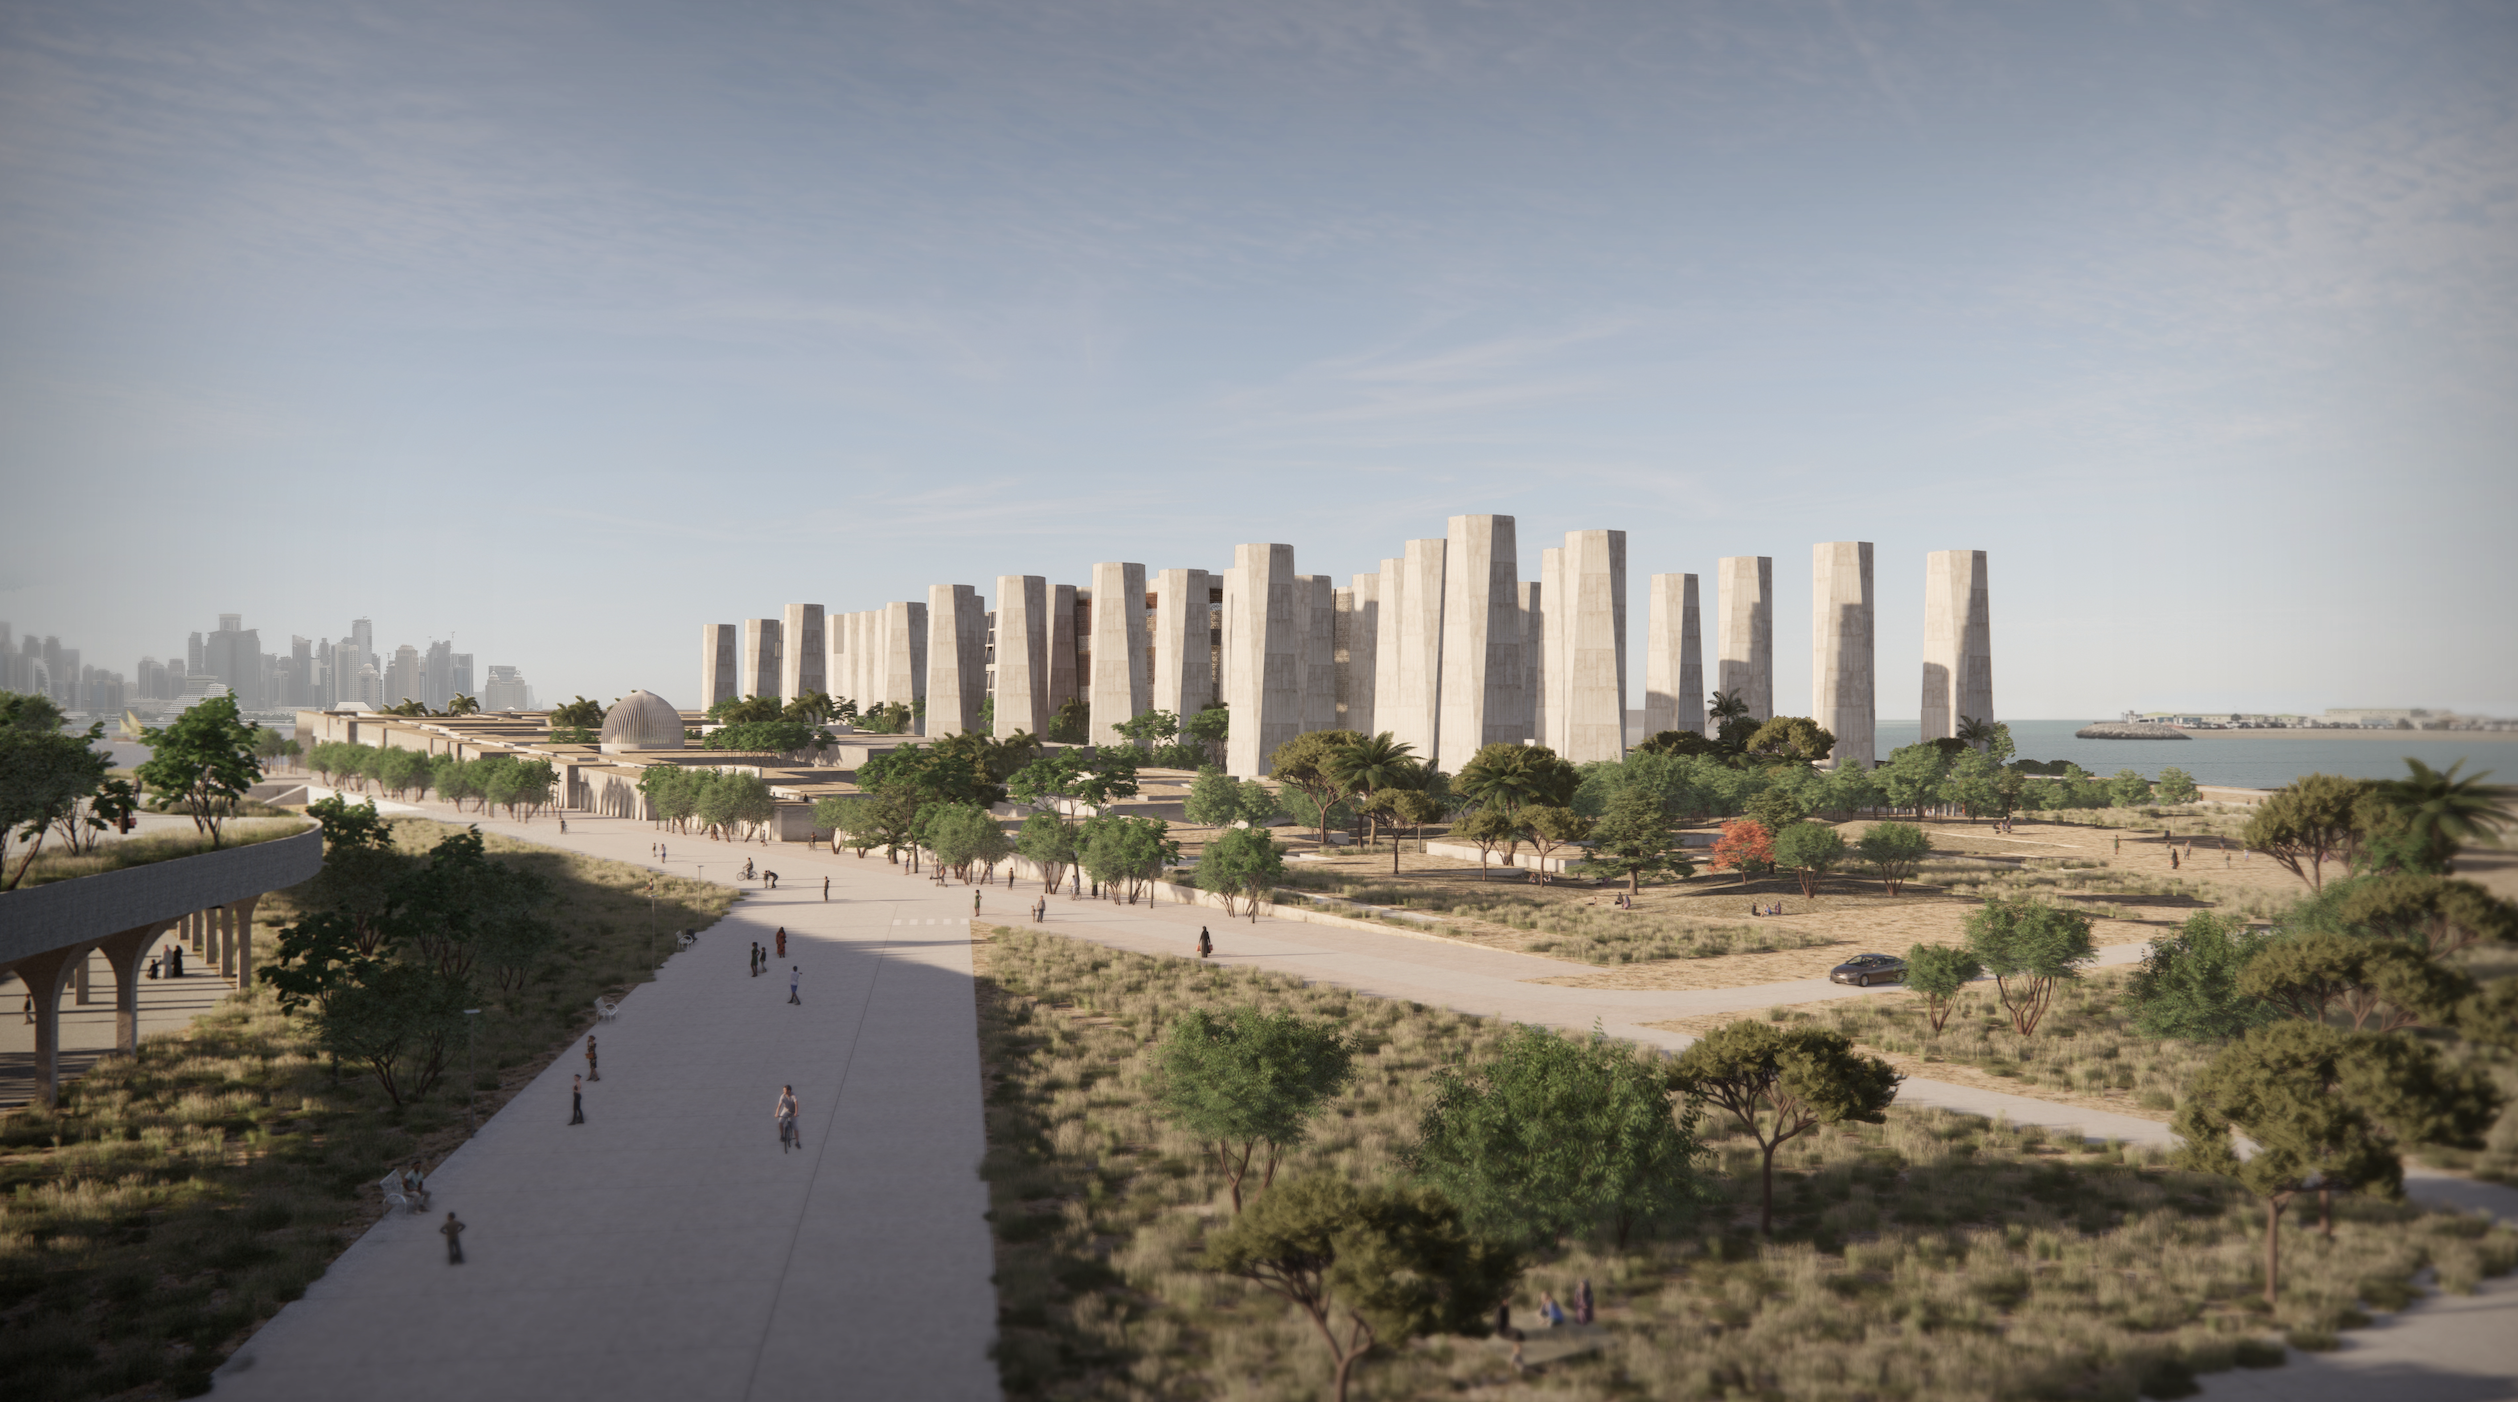 A digital render of a futuristic museum made up of stone towers, surrounded by park space with Doha Skyline behind.